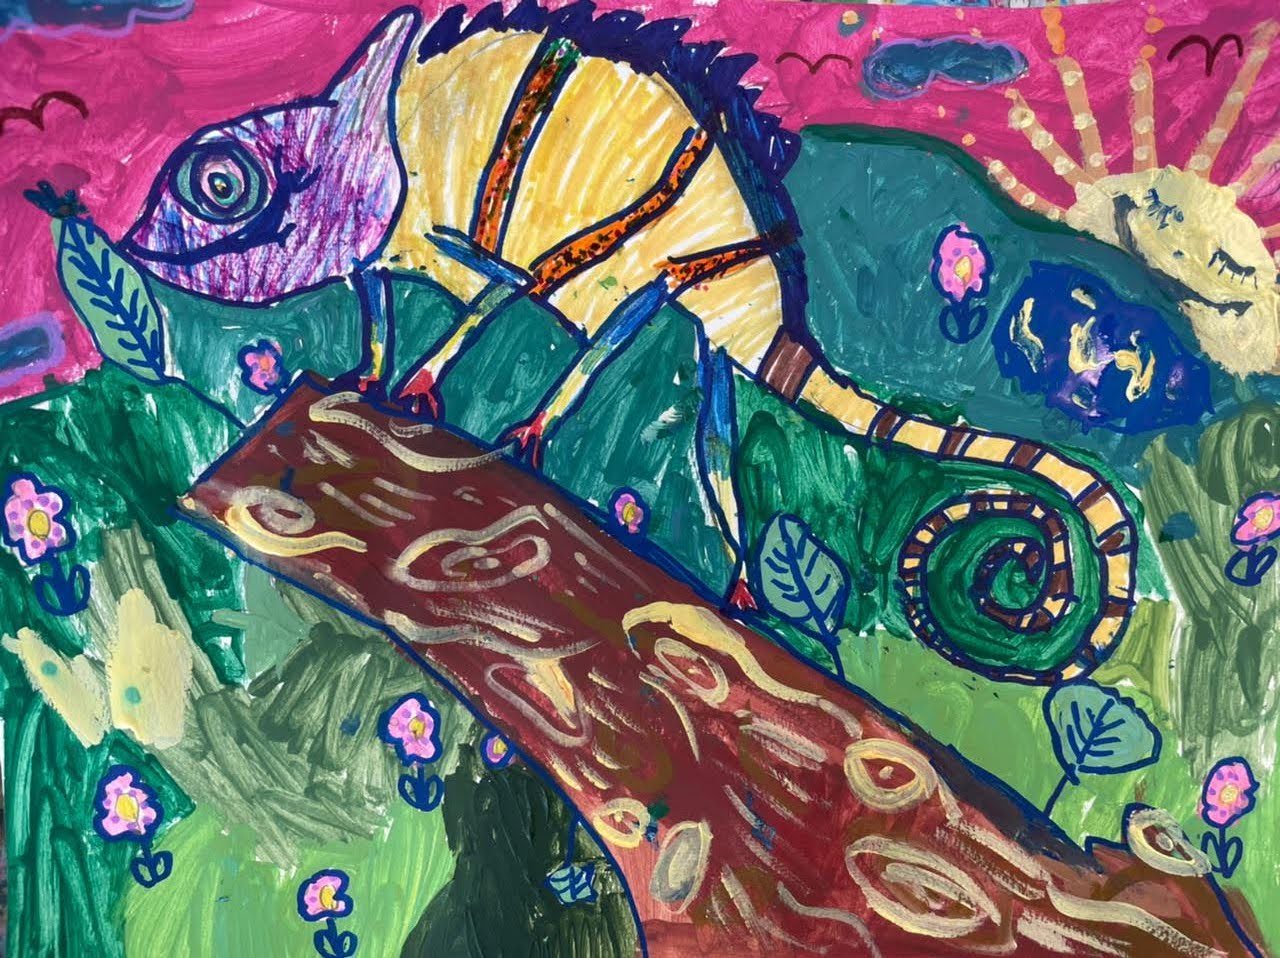 Art class for children- Watercolor painting and Mixed media Ages 10-14 –  Blair-Center-for-the-Arts